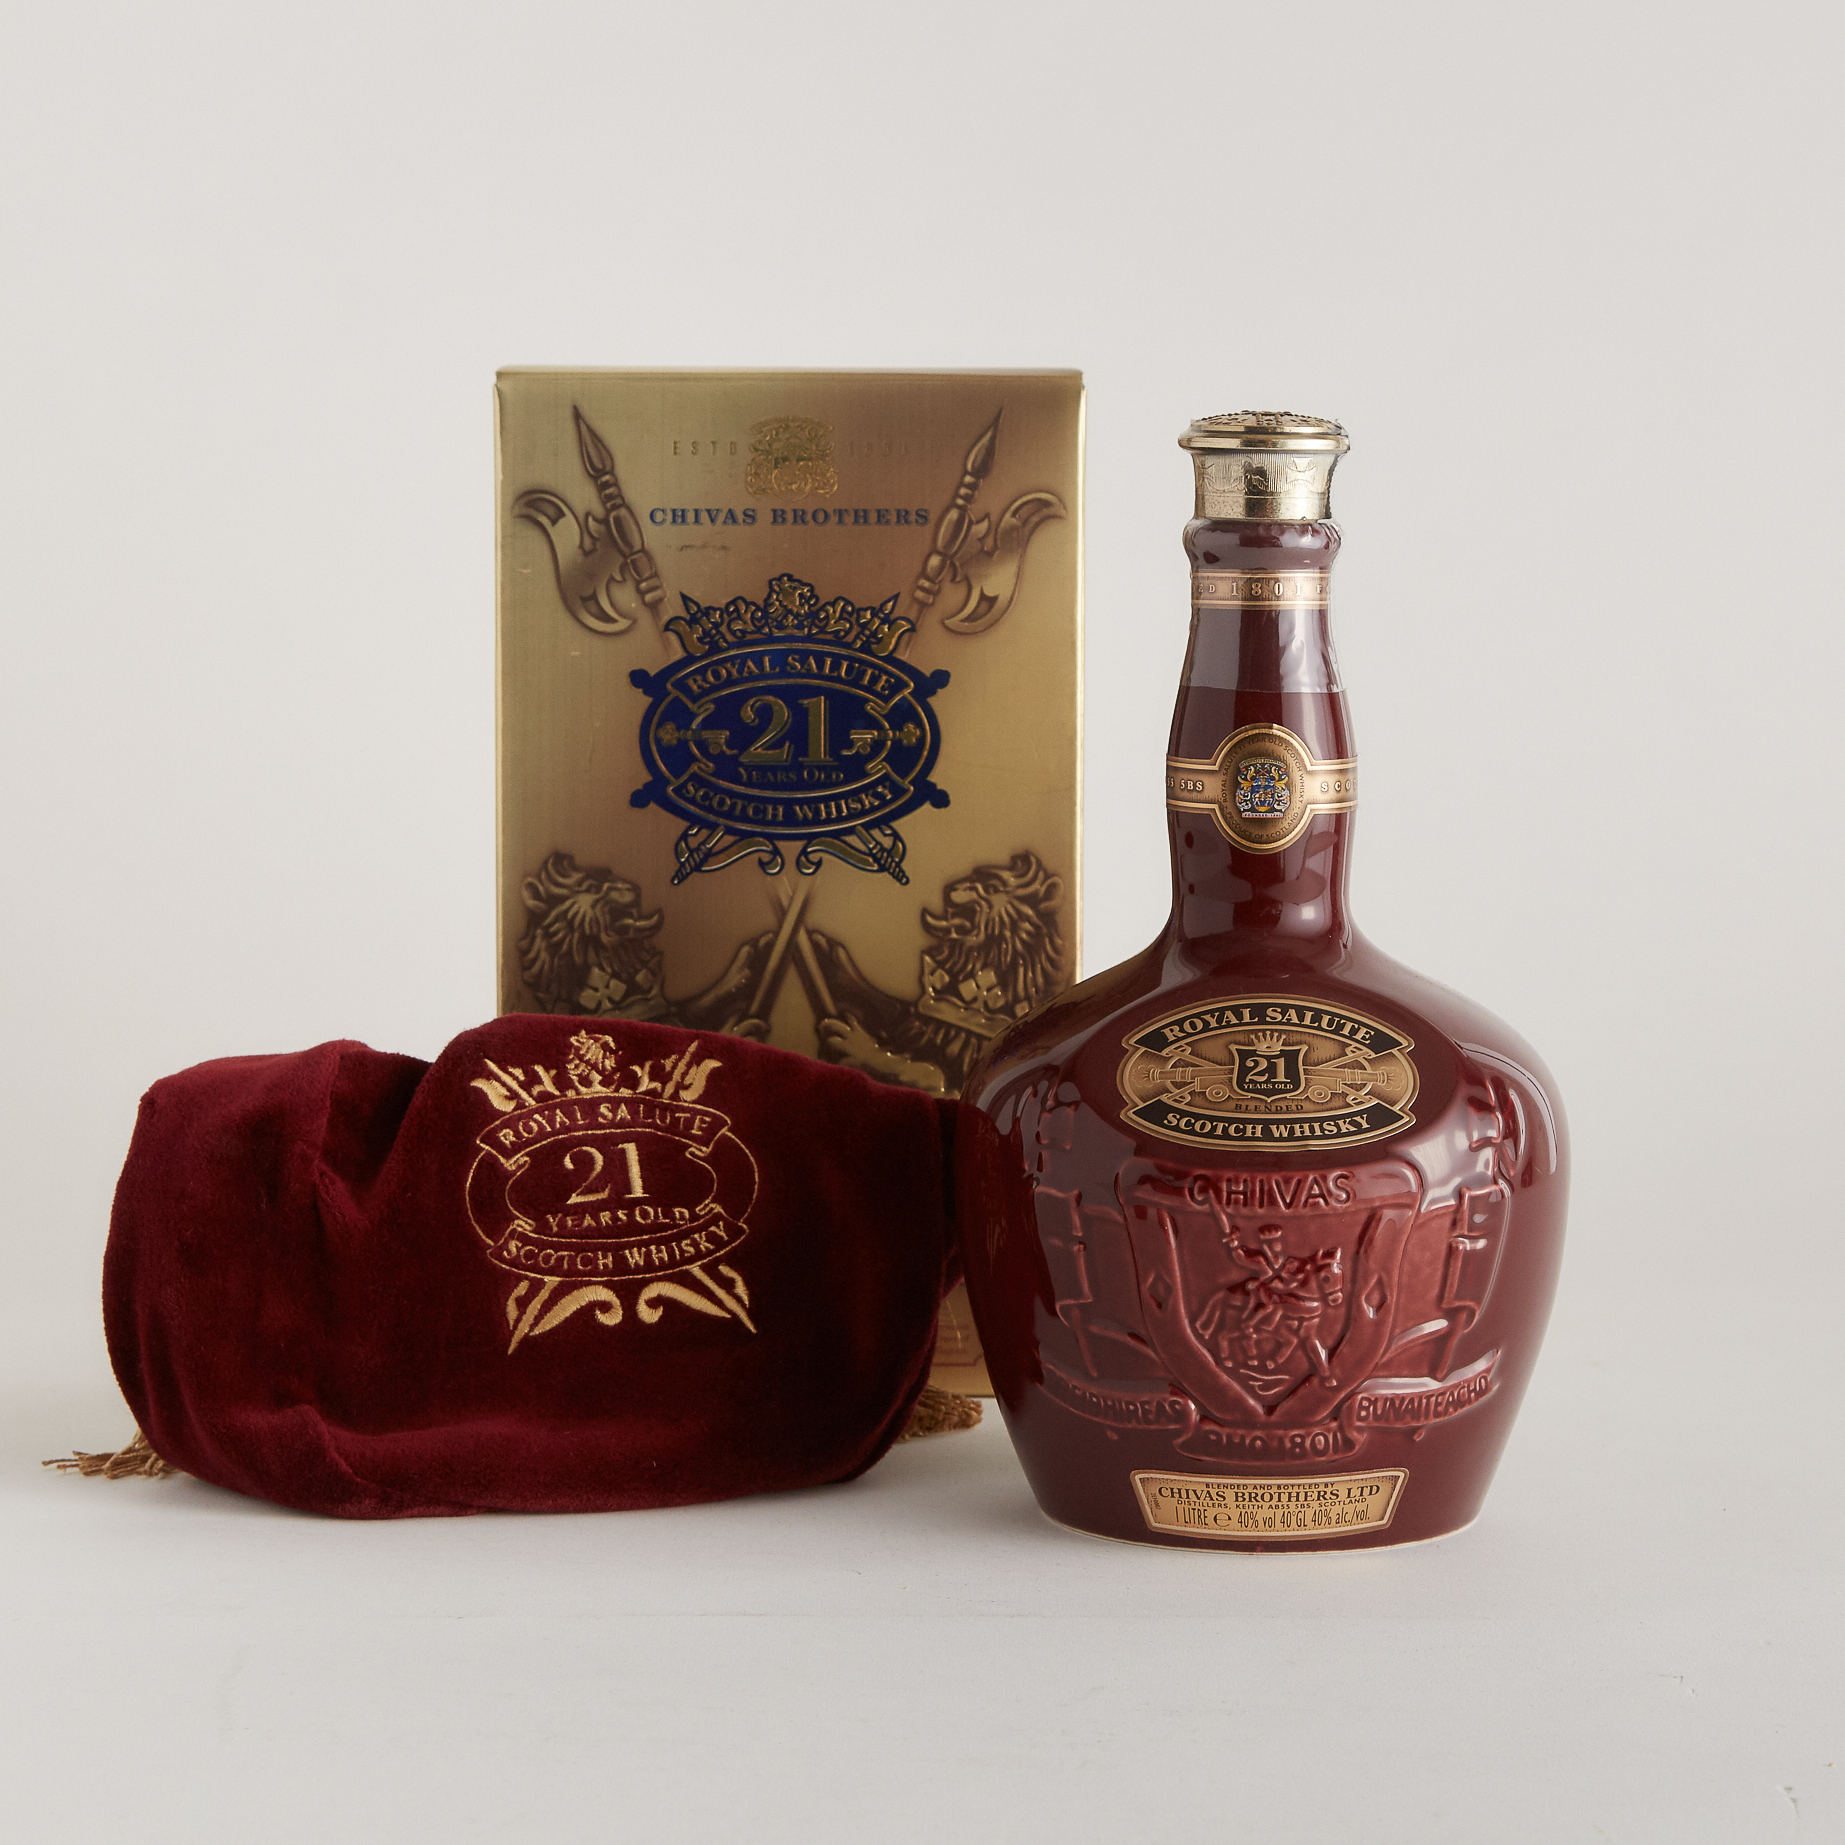 CHIVAS ROYAL SALUTE BLENDED SCOTCH WHISKY 21 YEARS (ONE 1000 ML)